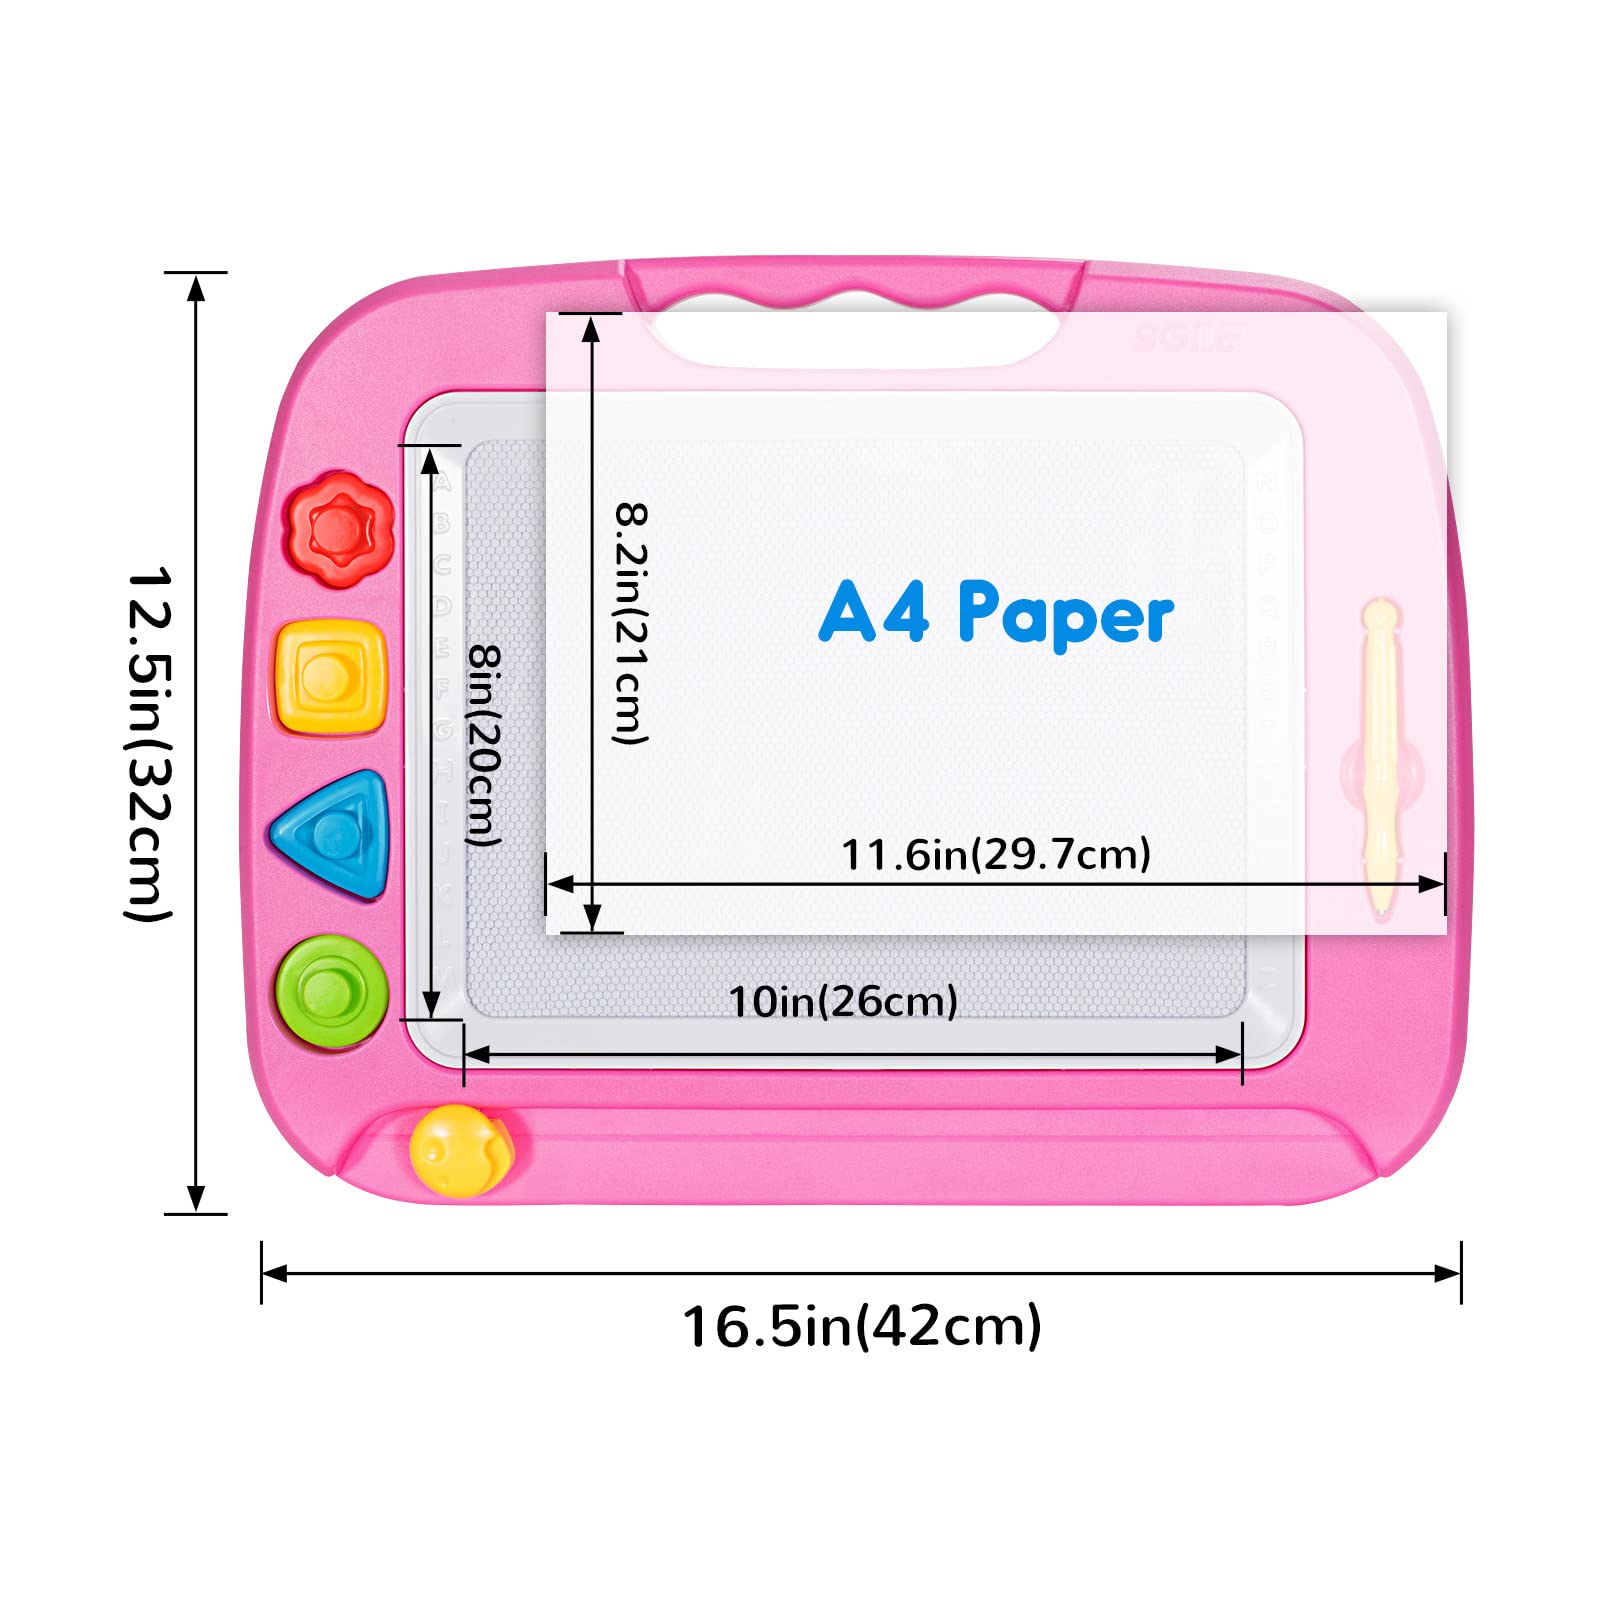 SGILE Large Magnetic Drawing Board - 4 Colors 42×33cm Doodle Pad with 4 Stamps for Toddlers, Learning Toy Gift Board Etch Sketch Toys for 36+ Month Kids Girls Boys, Pink